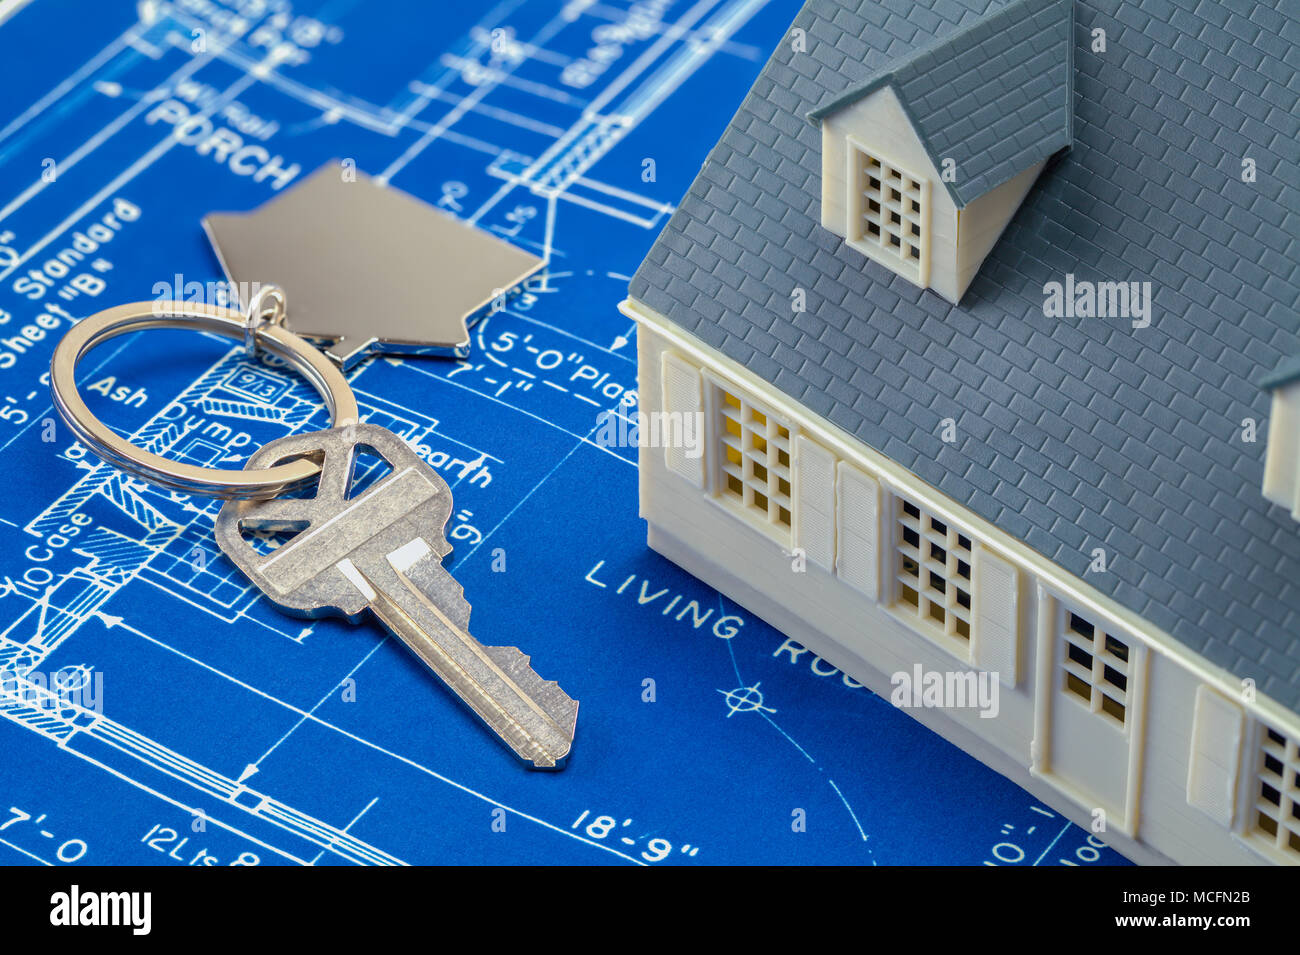 Blueprints with a Model House and Keys to Home. Stock Photo